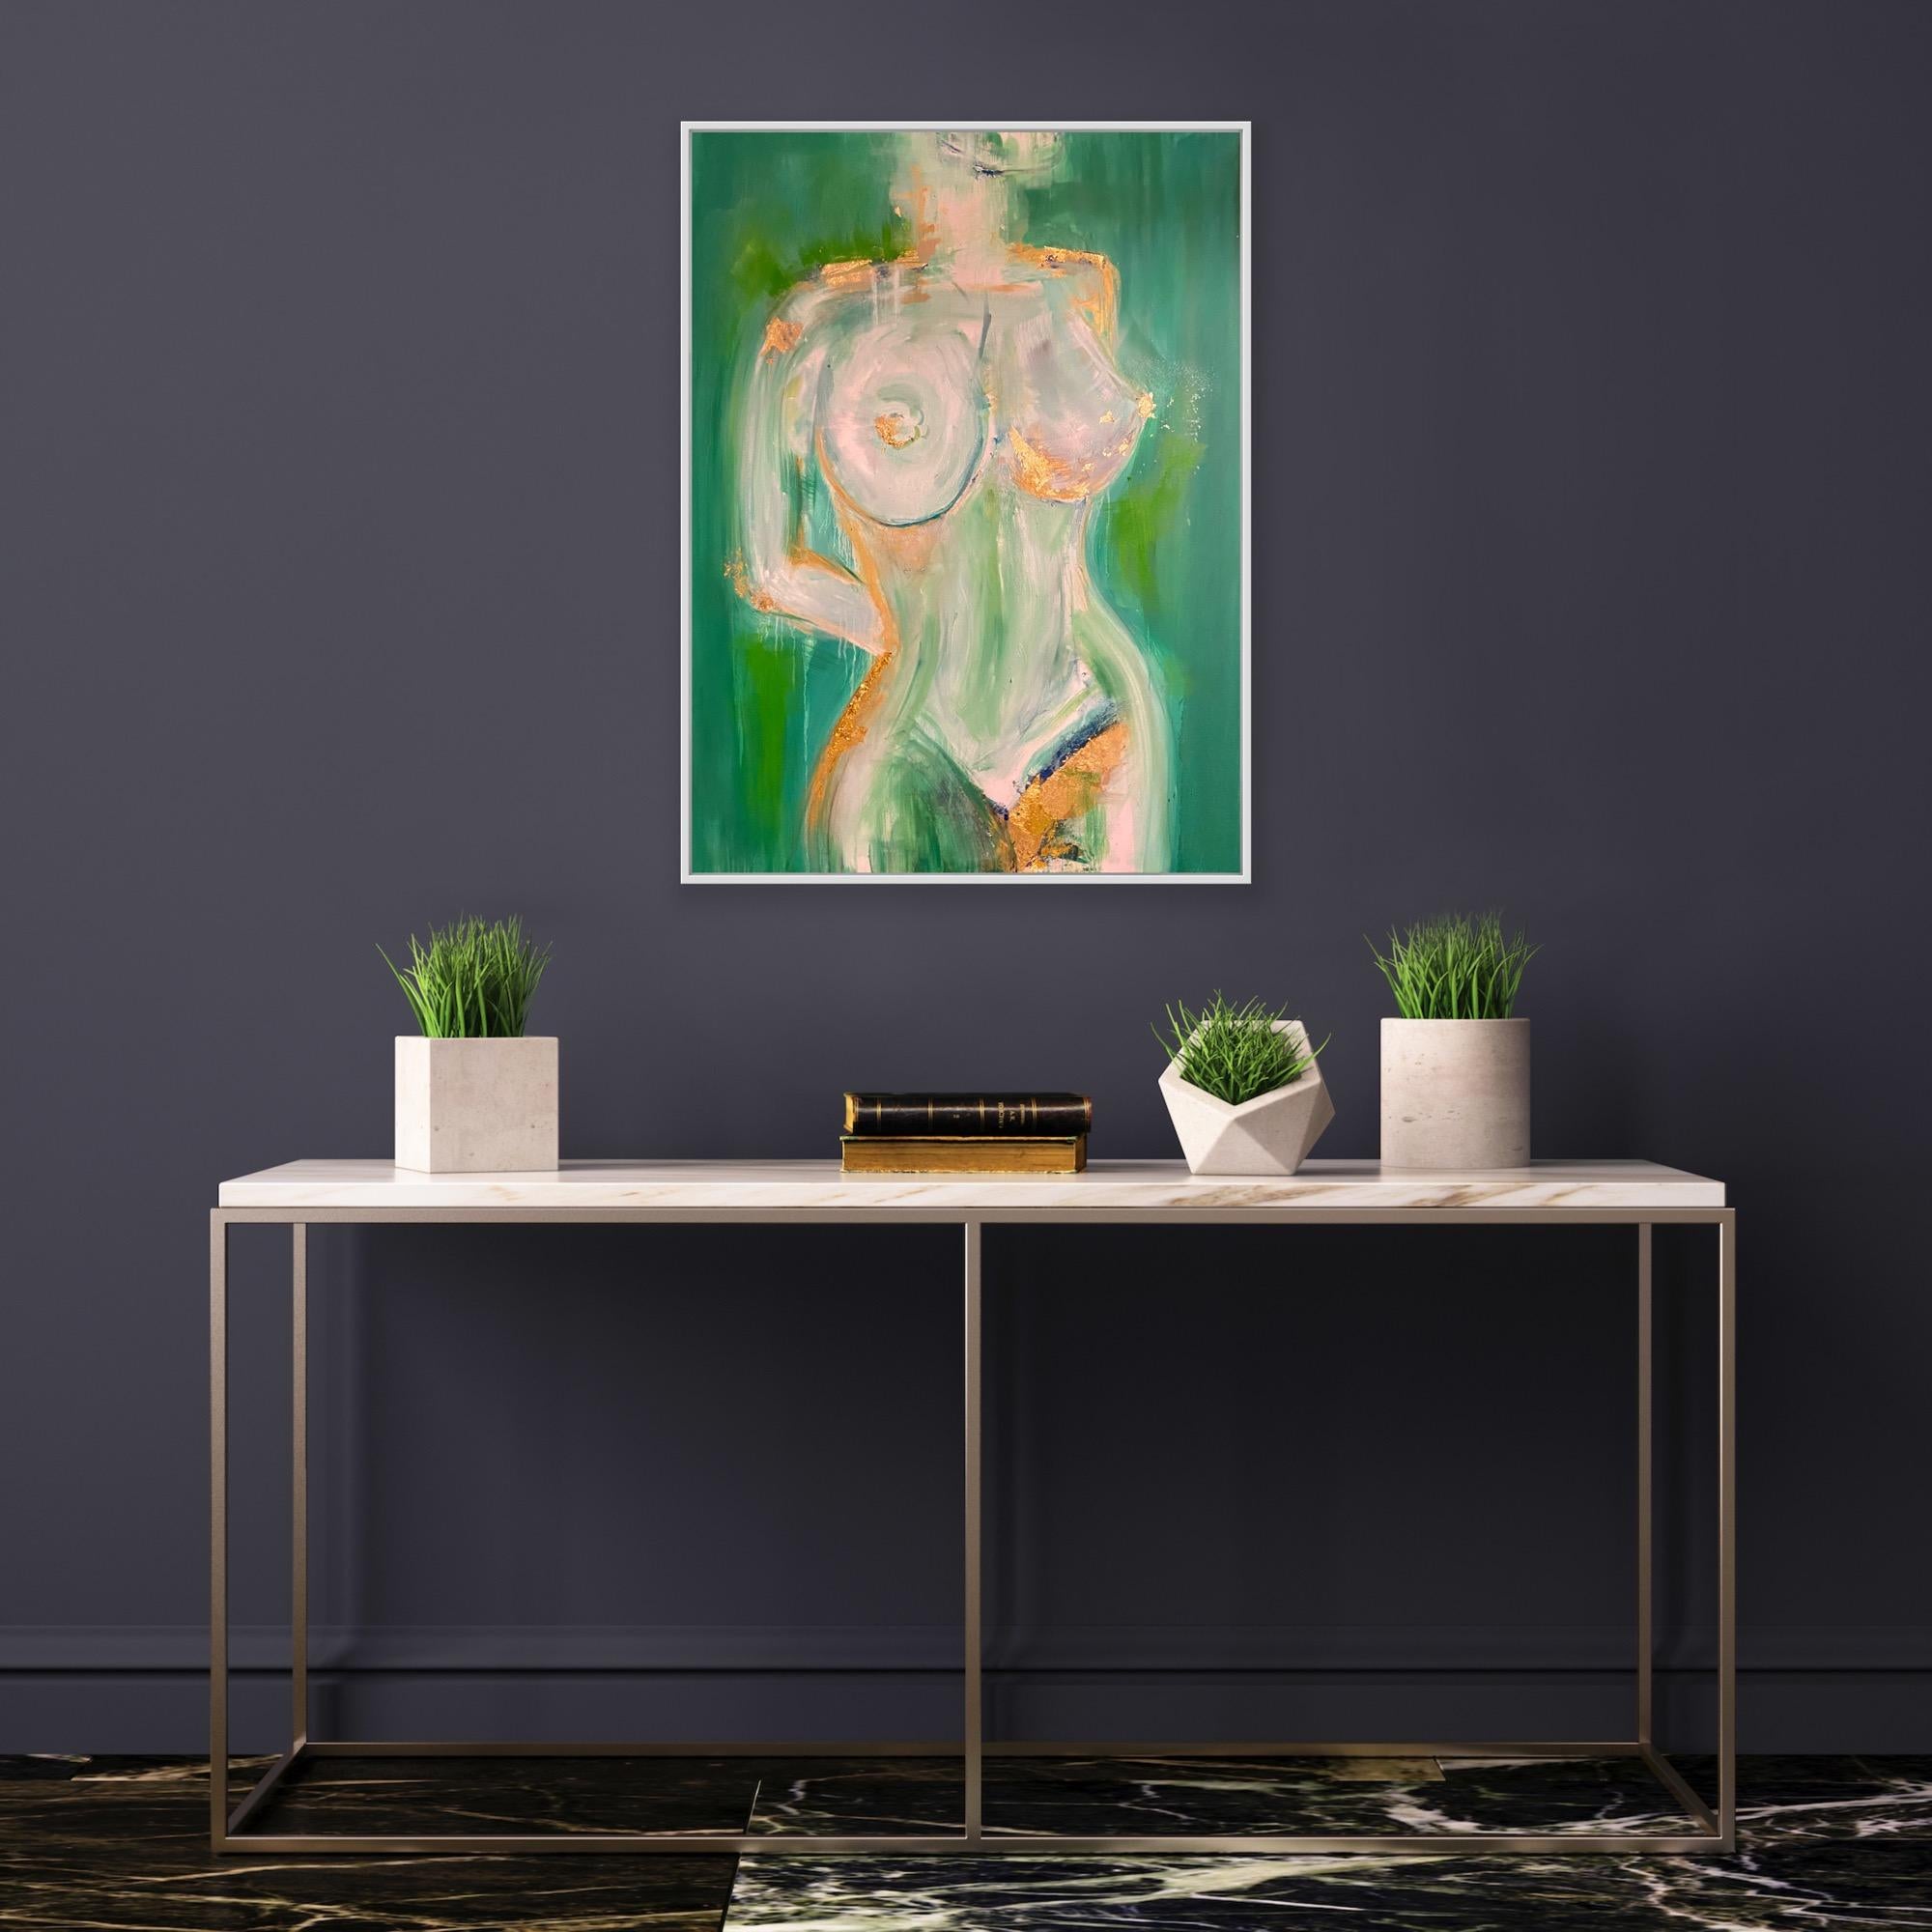 Green & Gold Sensuality - Contemporary Mixed Media Art by Angelika Richter